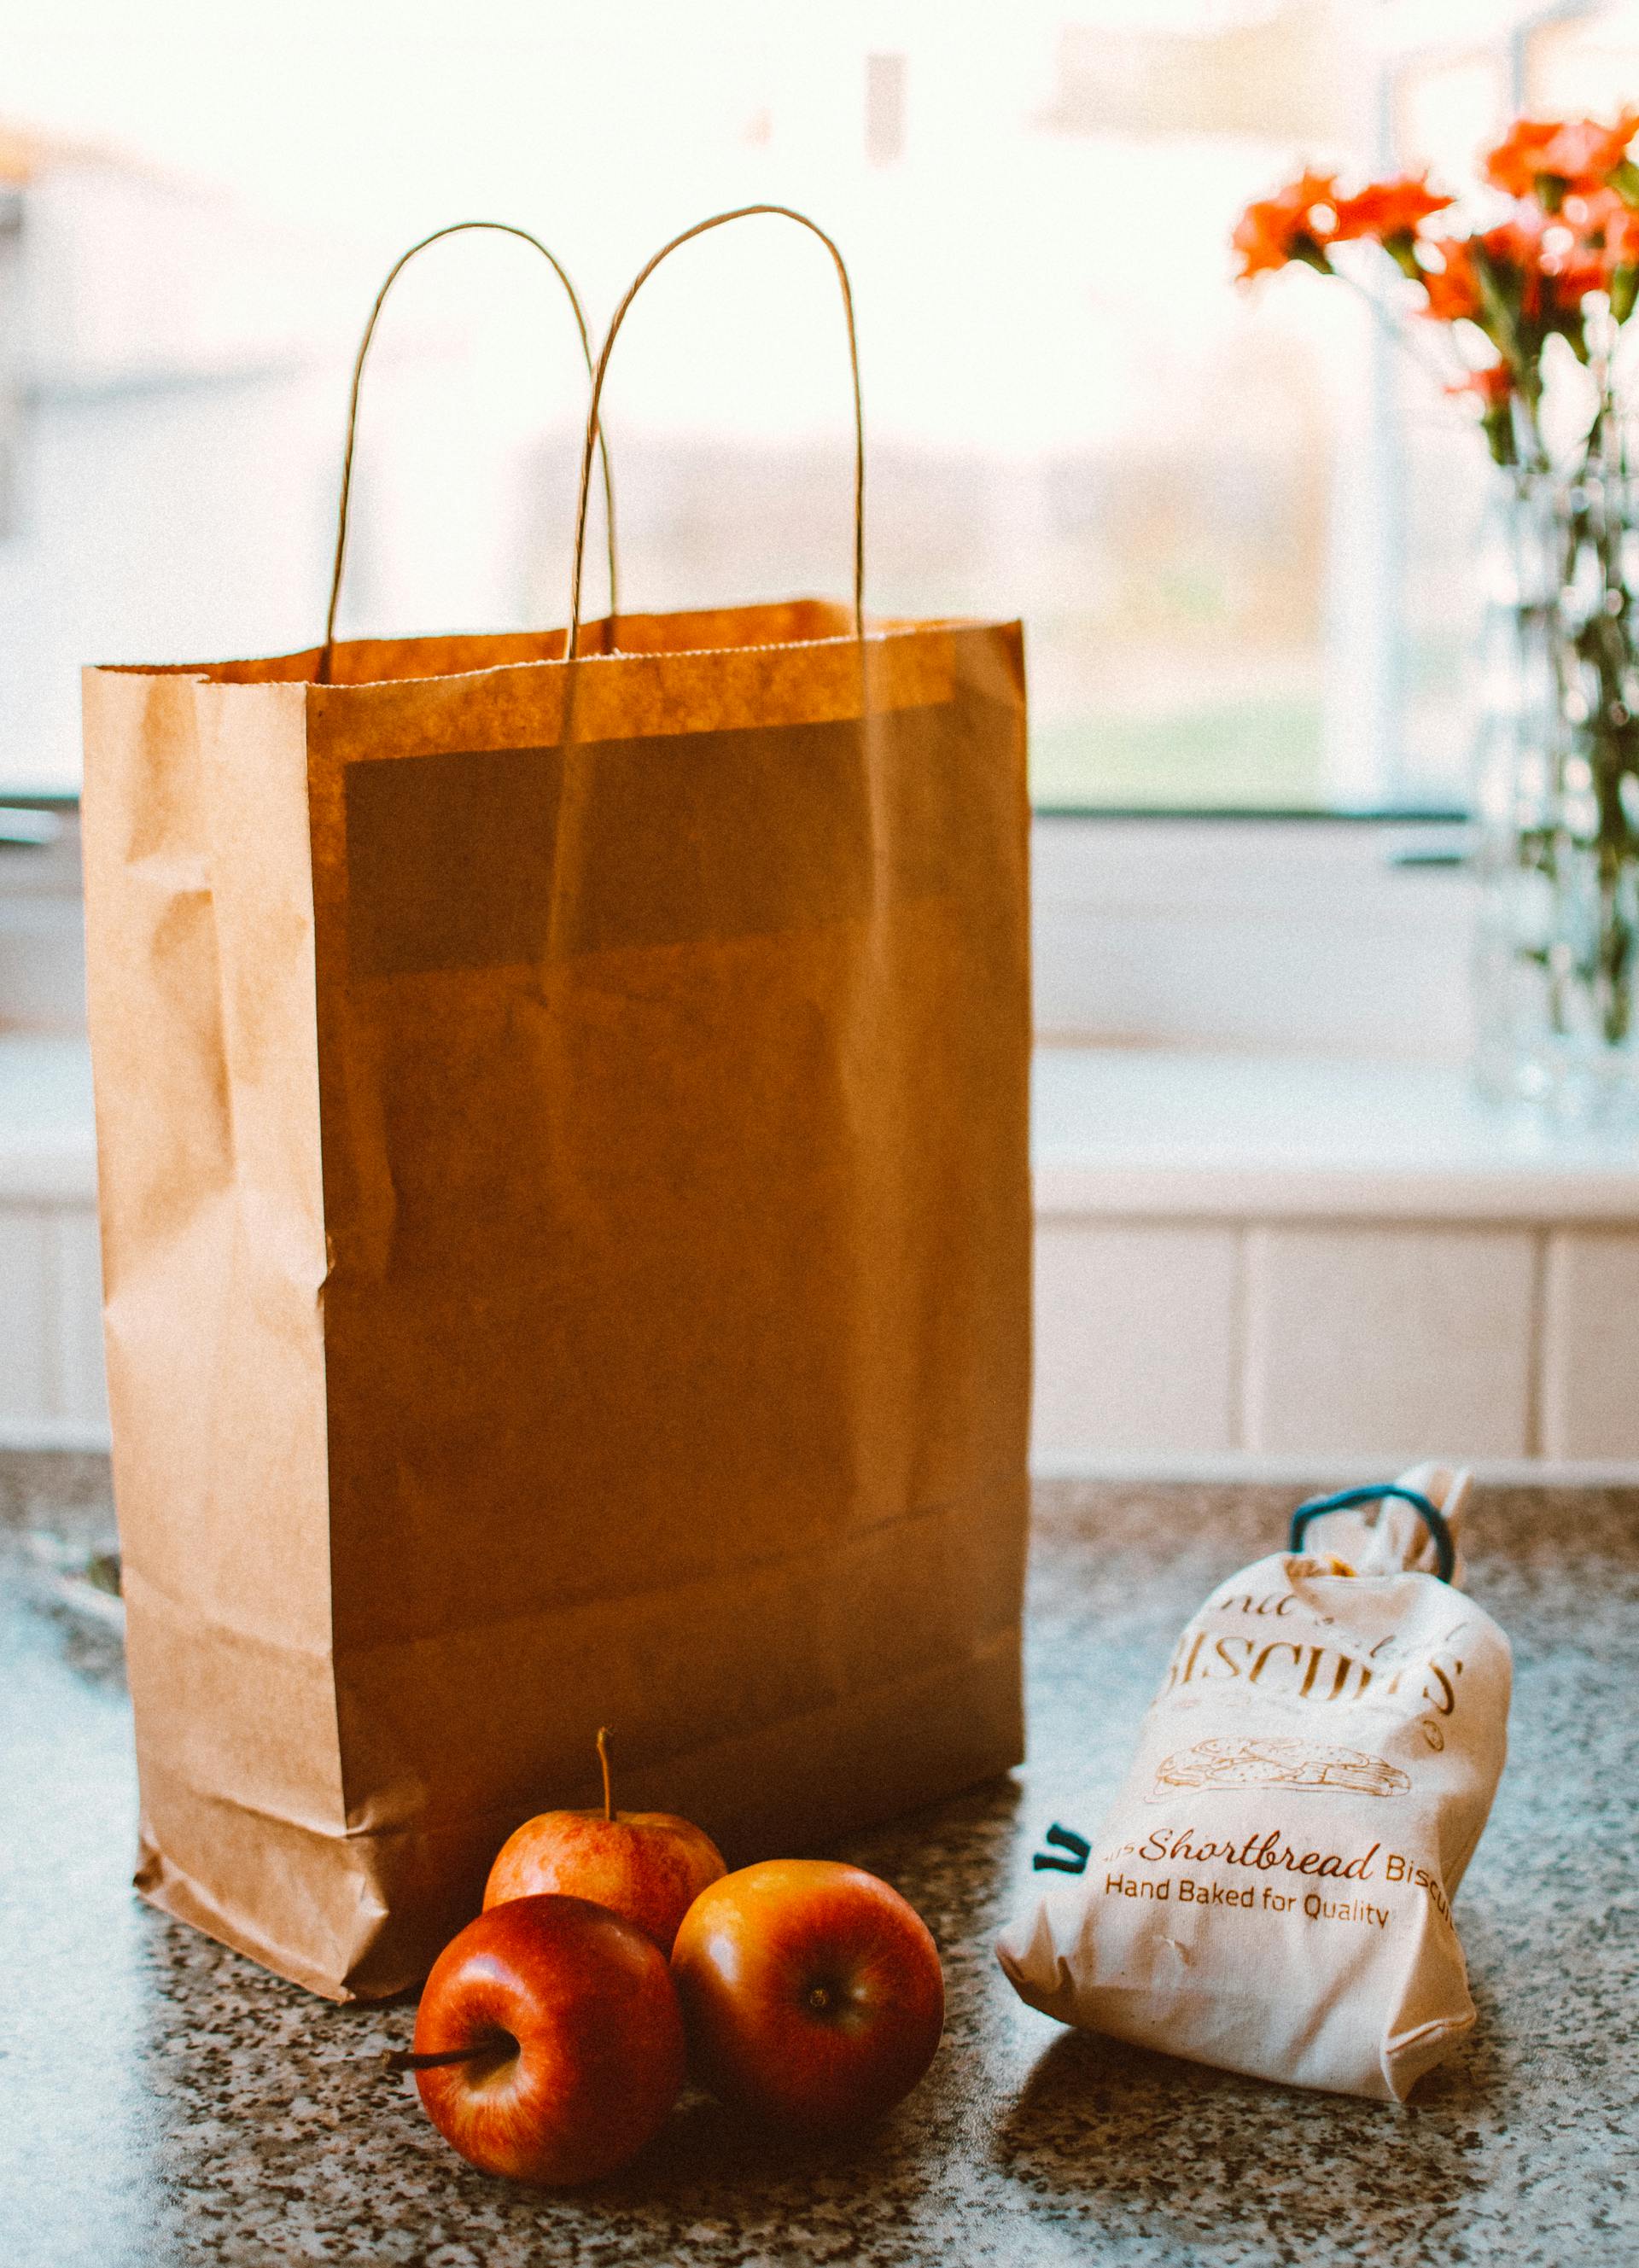 Several apples lying beside a brown paper bag and a pack of bread | Source: Pexels